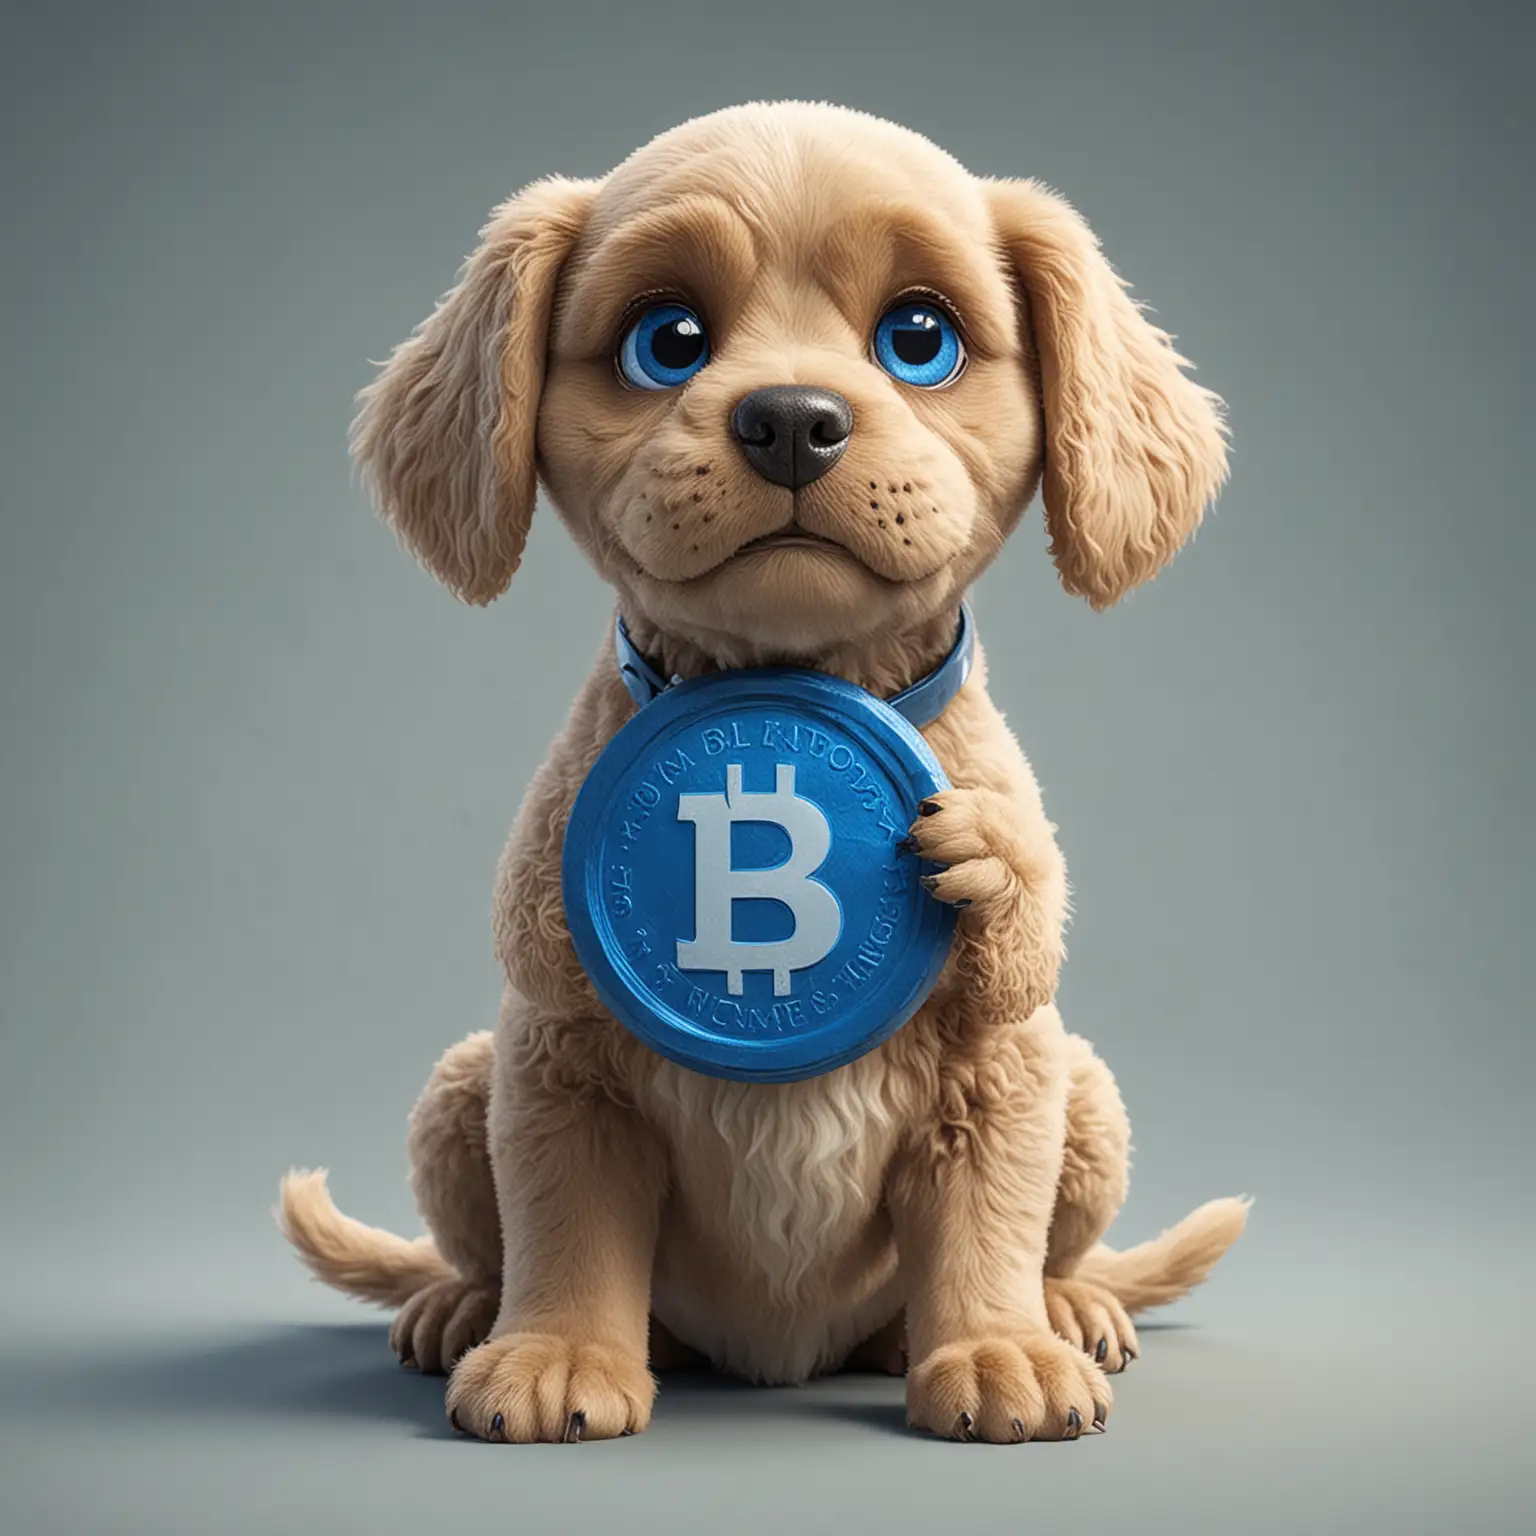 Adorable-Dog-Holding-a-Heap-of-Blue-Coins